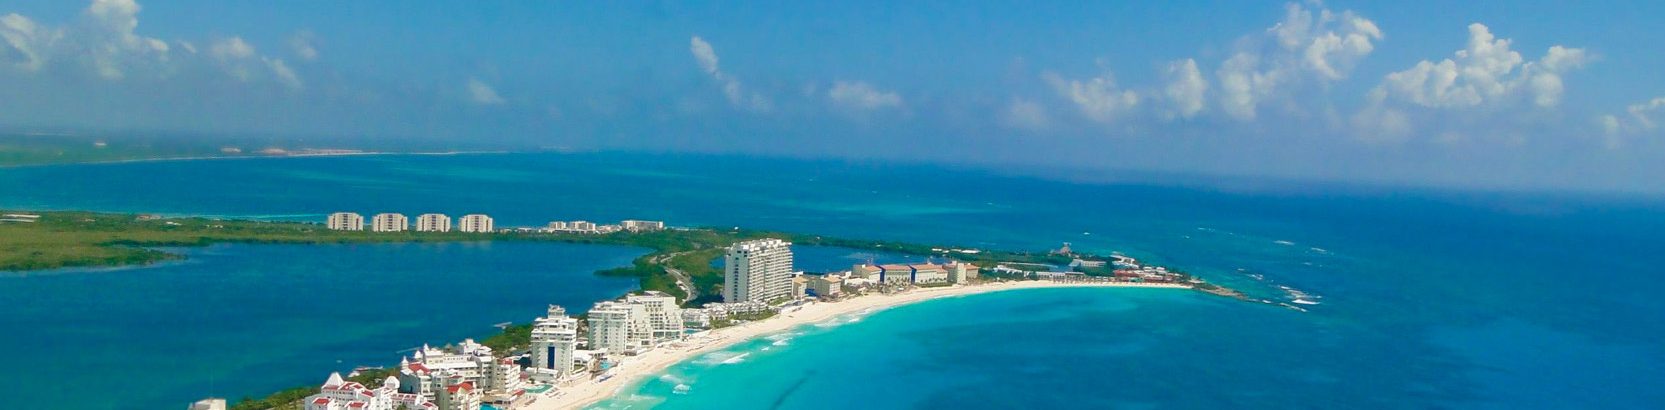 Transfer from Airport Cancun to Hotel Zone